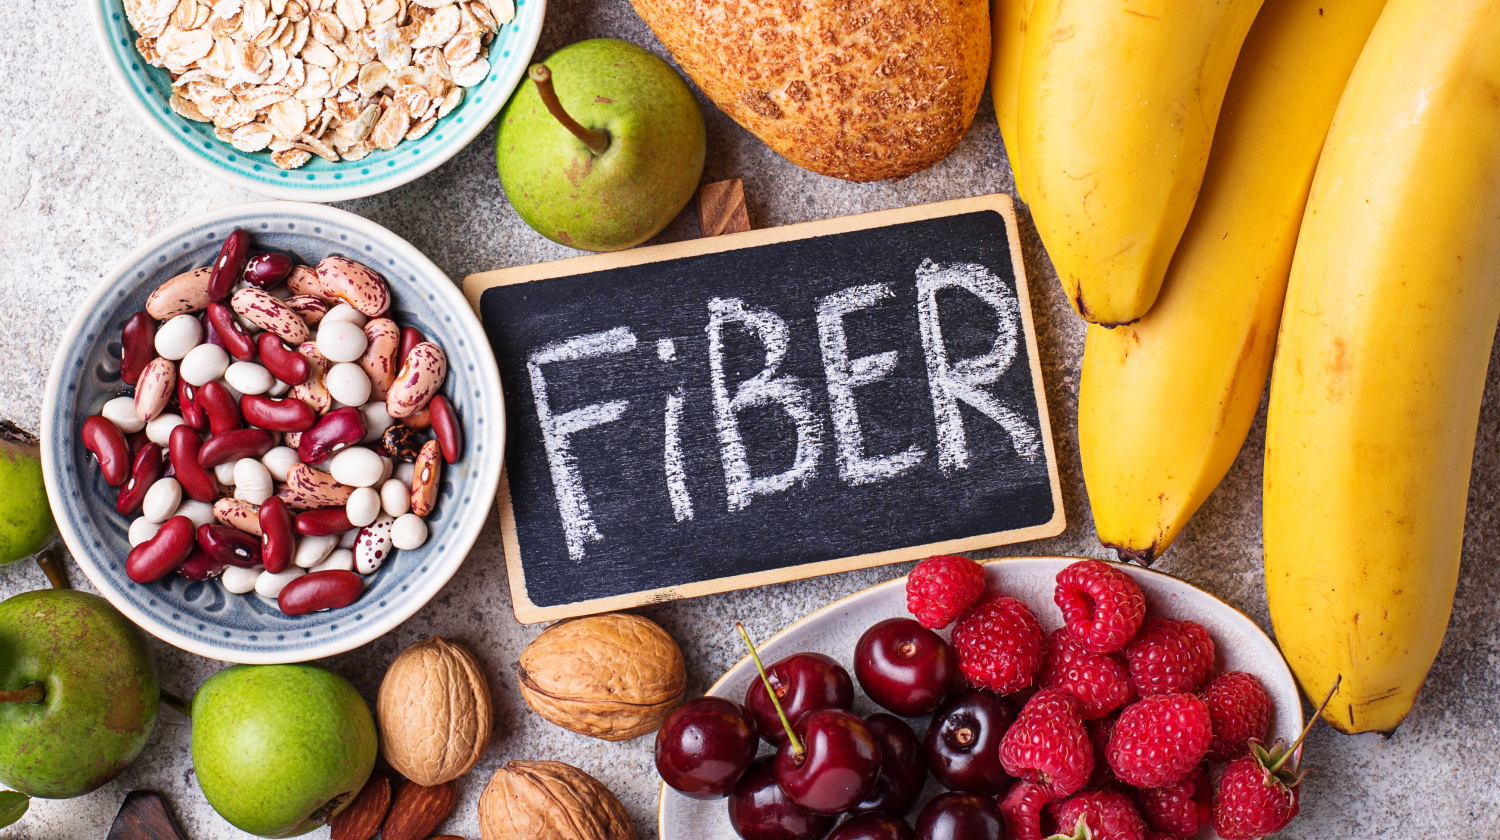 does fiber help you lose weight